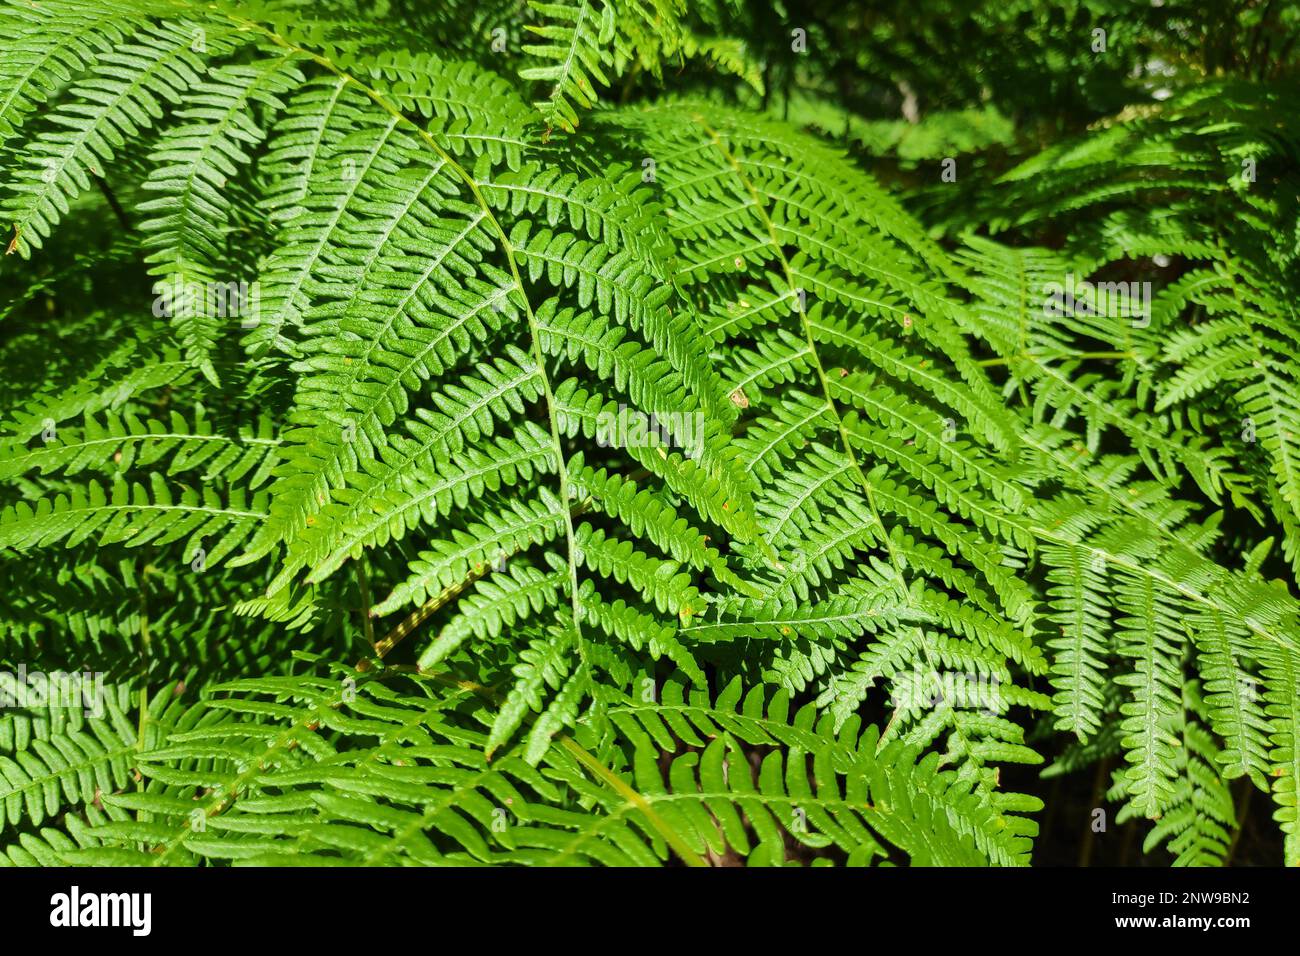 A fern (Polypodiopsida or Polypodiophyta) is a member of a group of vascular plants (plants with xylem and phloem) that reproduce via spores and have Stock Photo